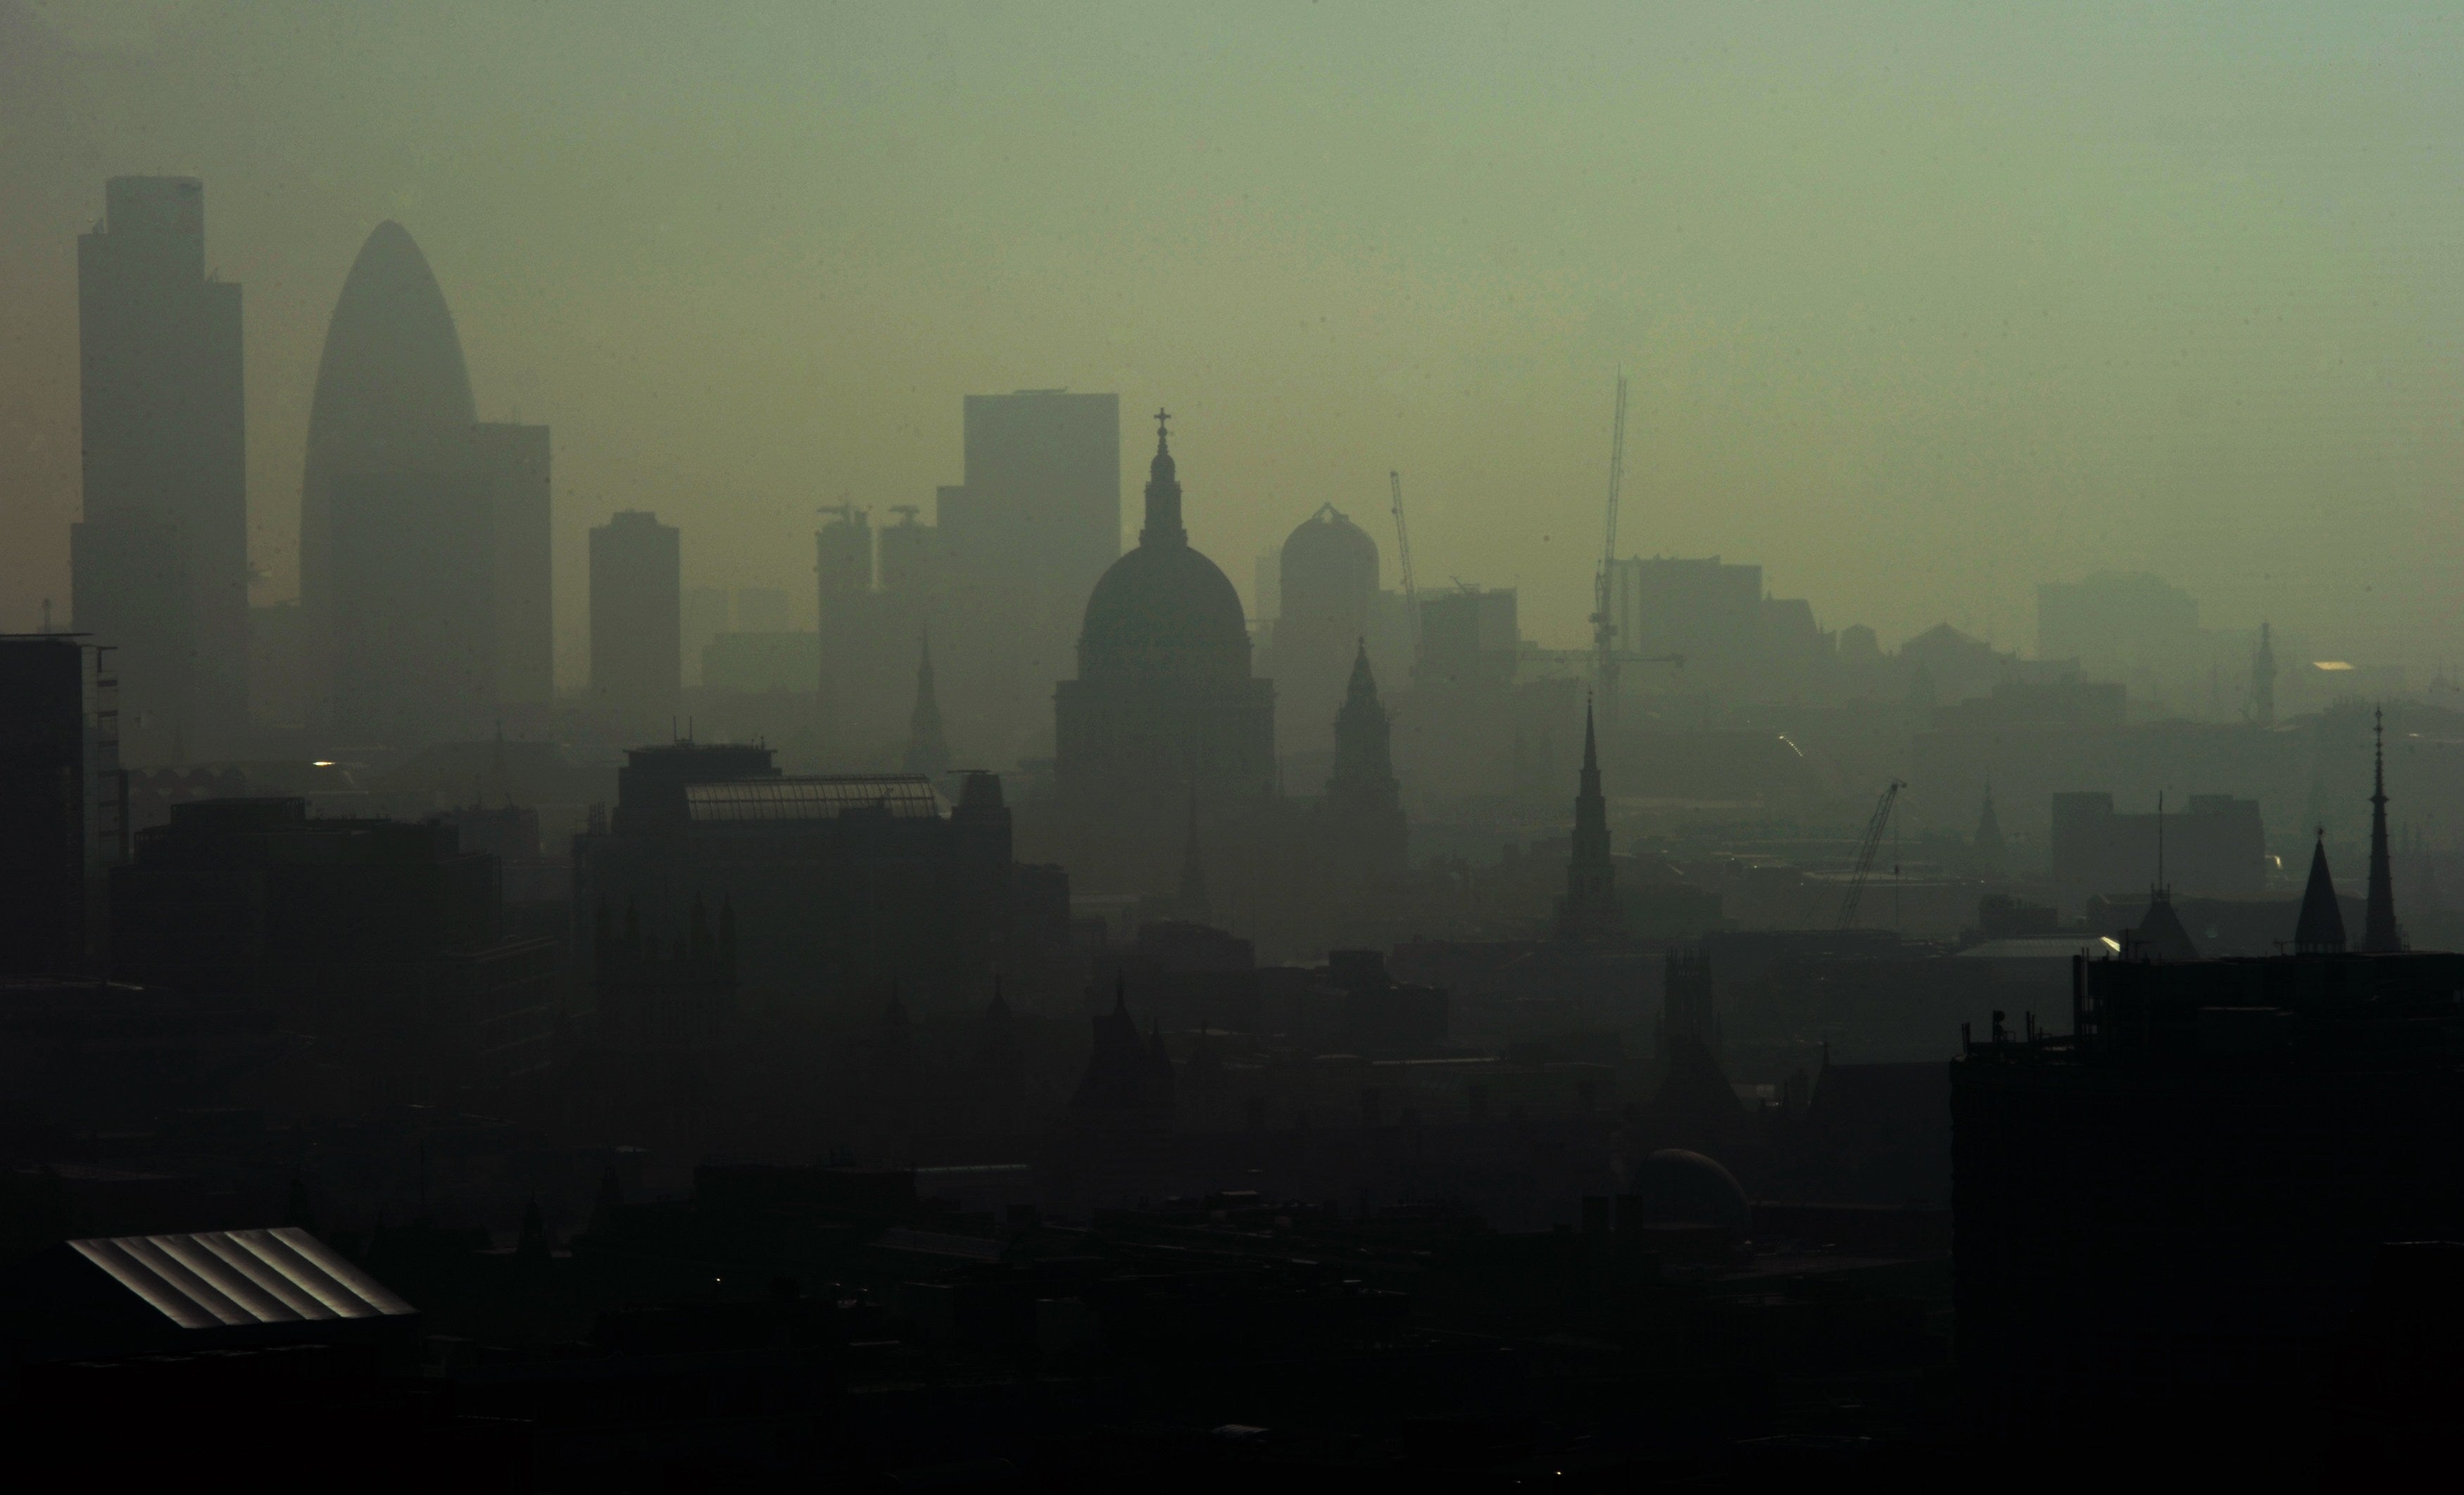 St. Paul’s Cathedral is seen among the skyline through the smog in 2011.